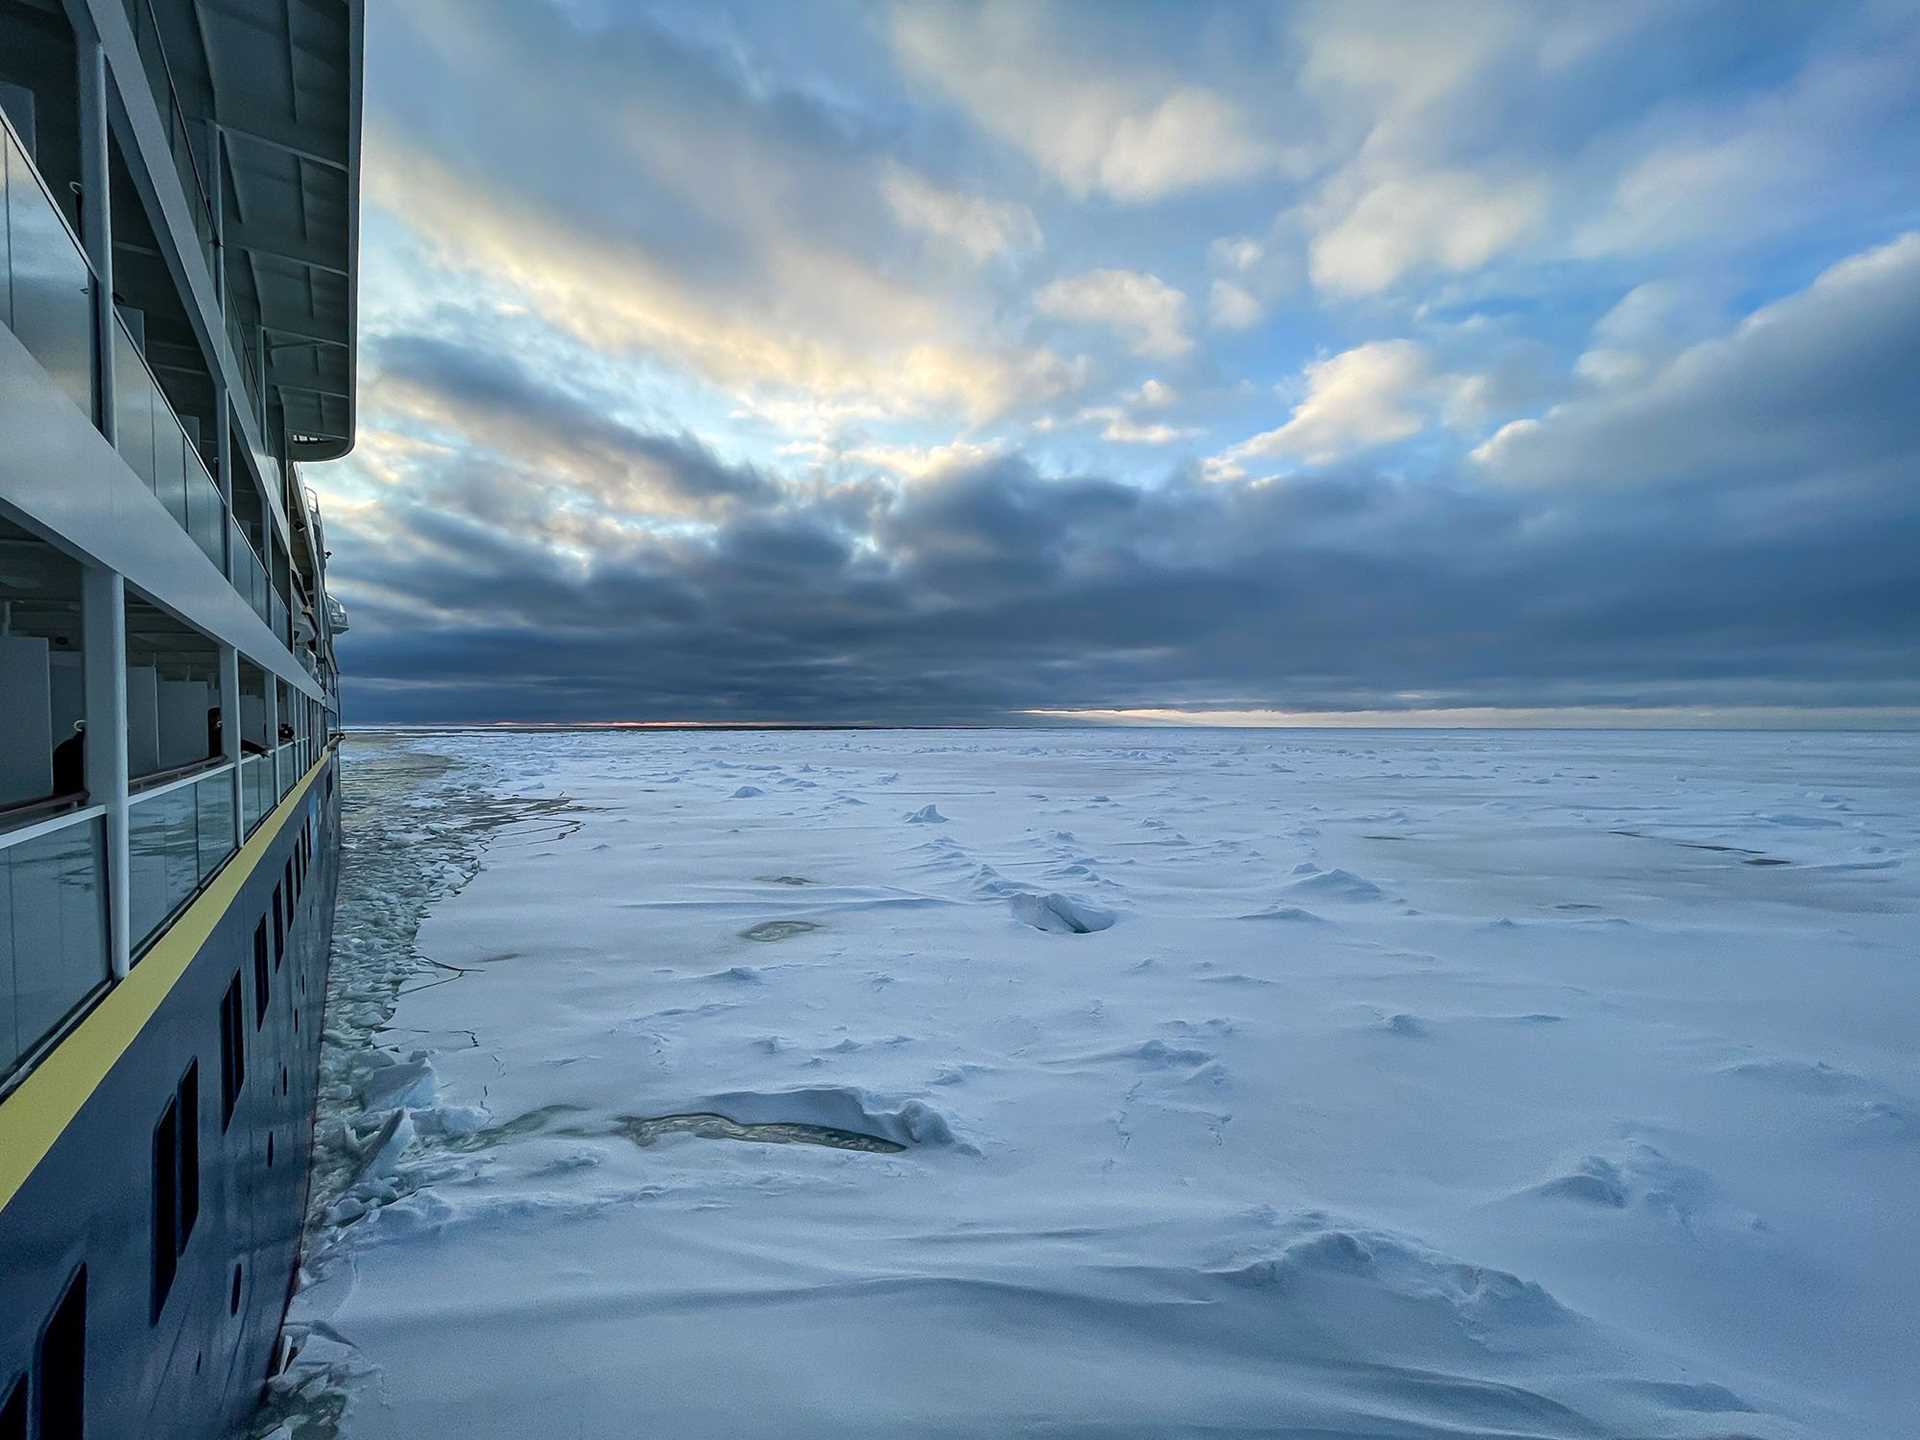 icy landscape and the side of a ship